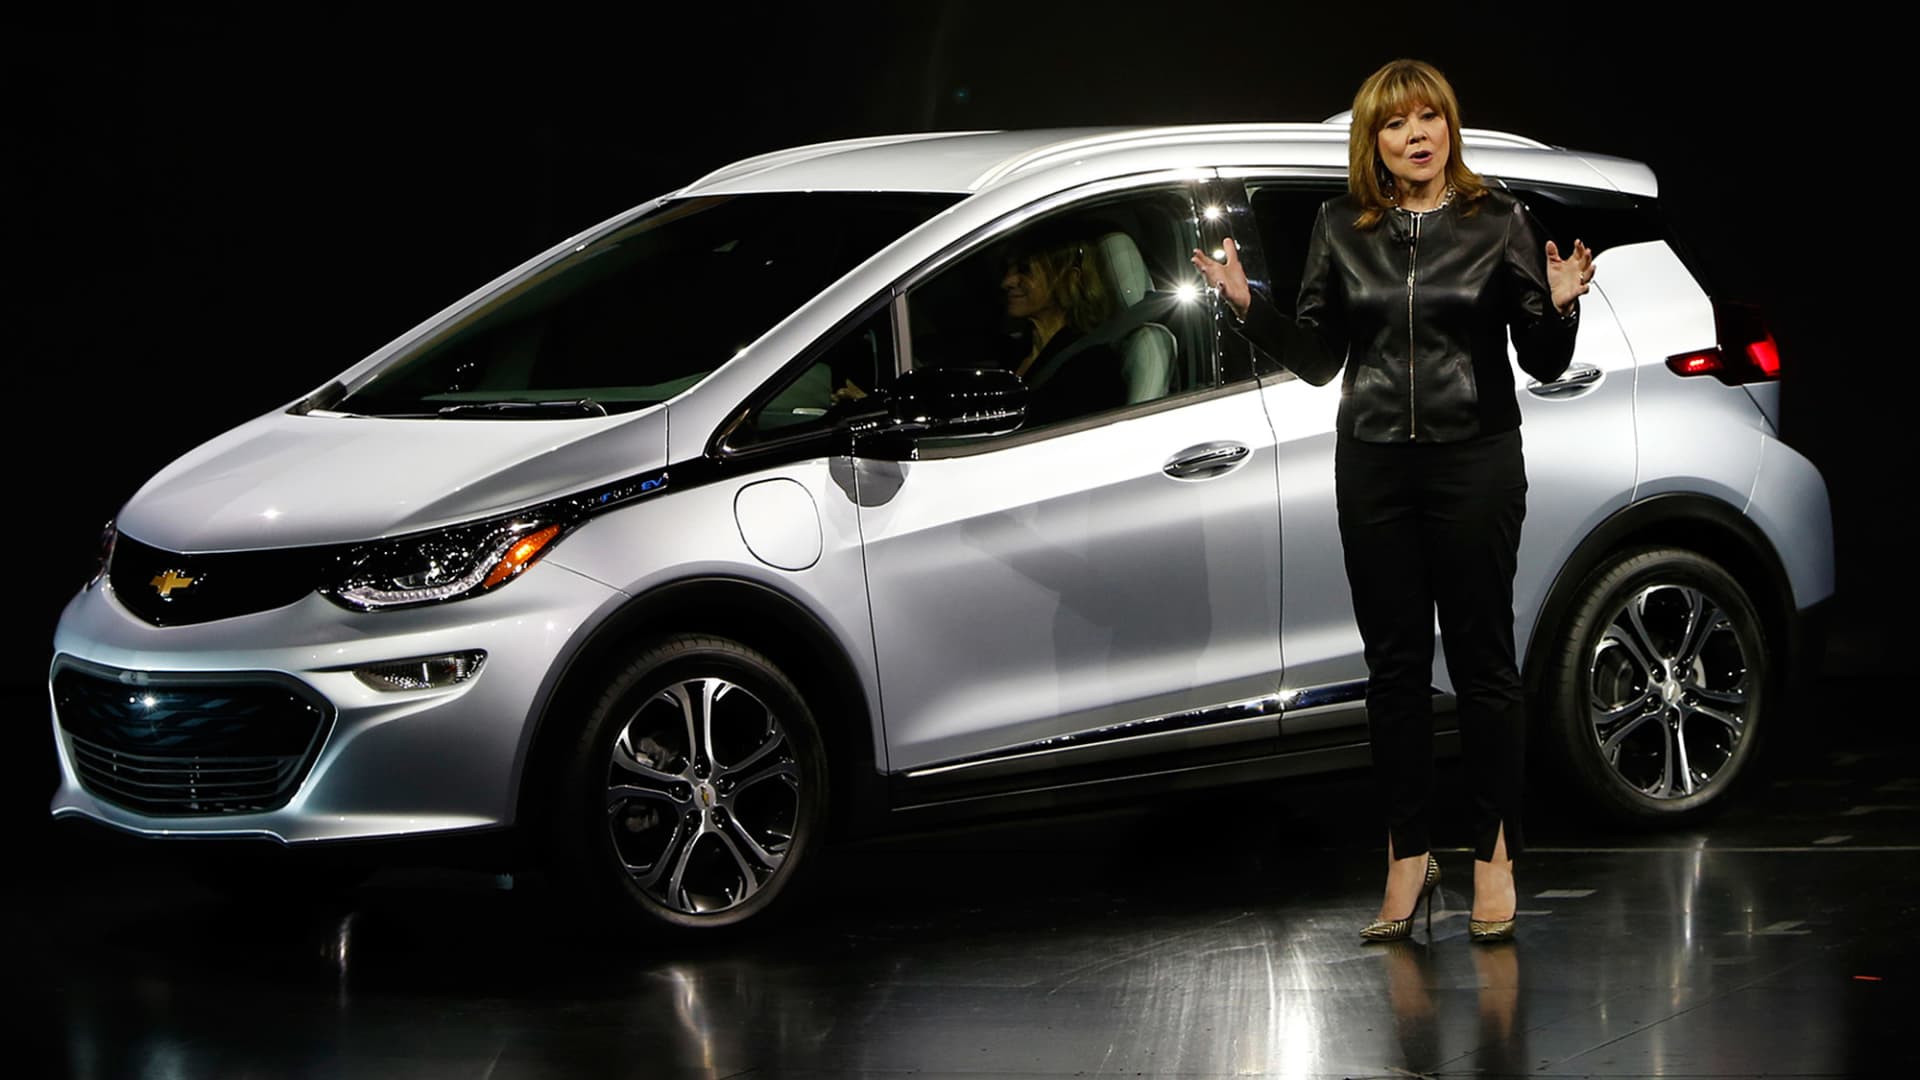 General Motors CEO Mary Barra unveiled the Chevrolet Bolt electric vehicle during the 2016 Consumer Electronics Show in Las Vegas.